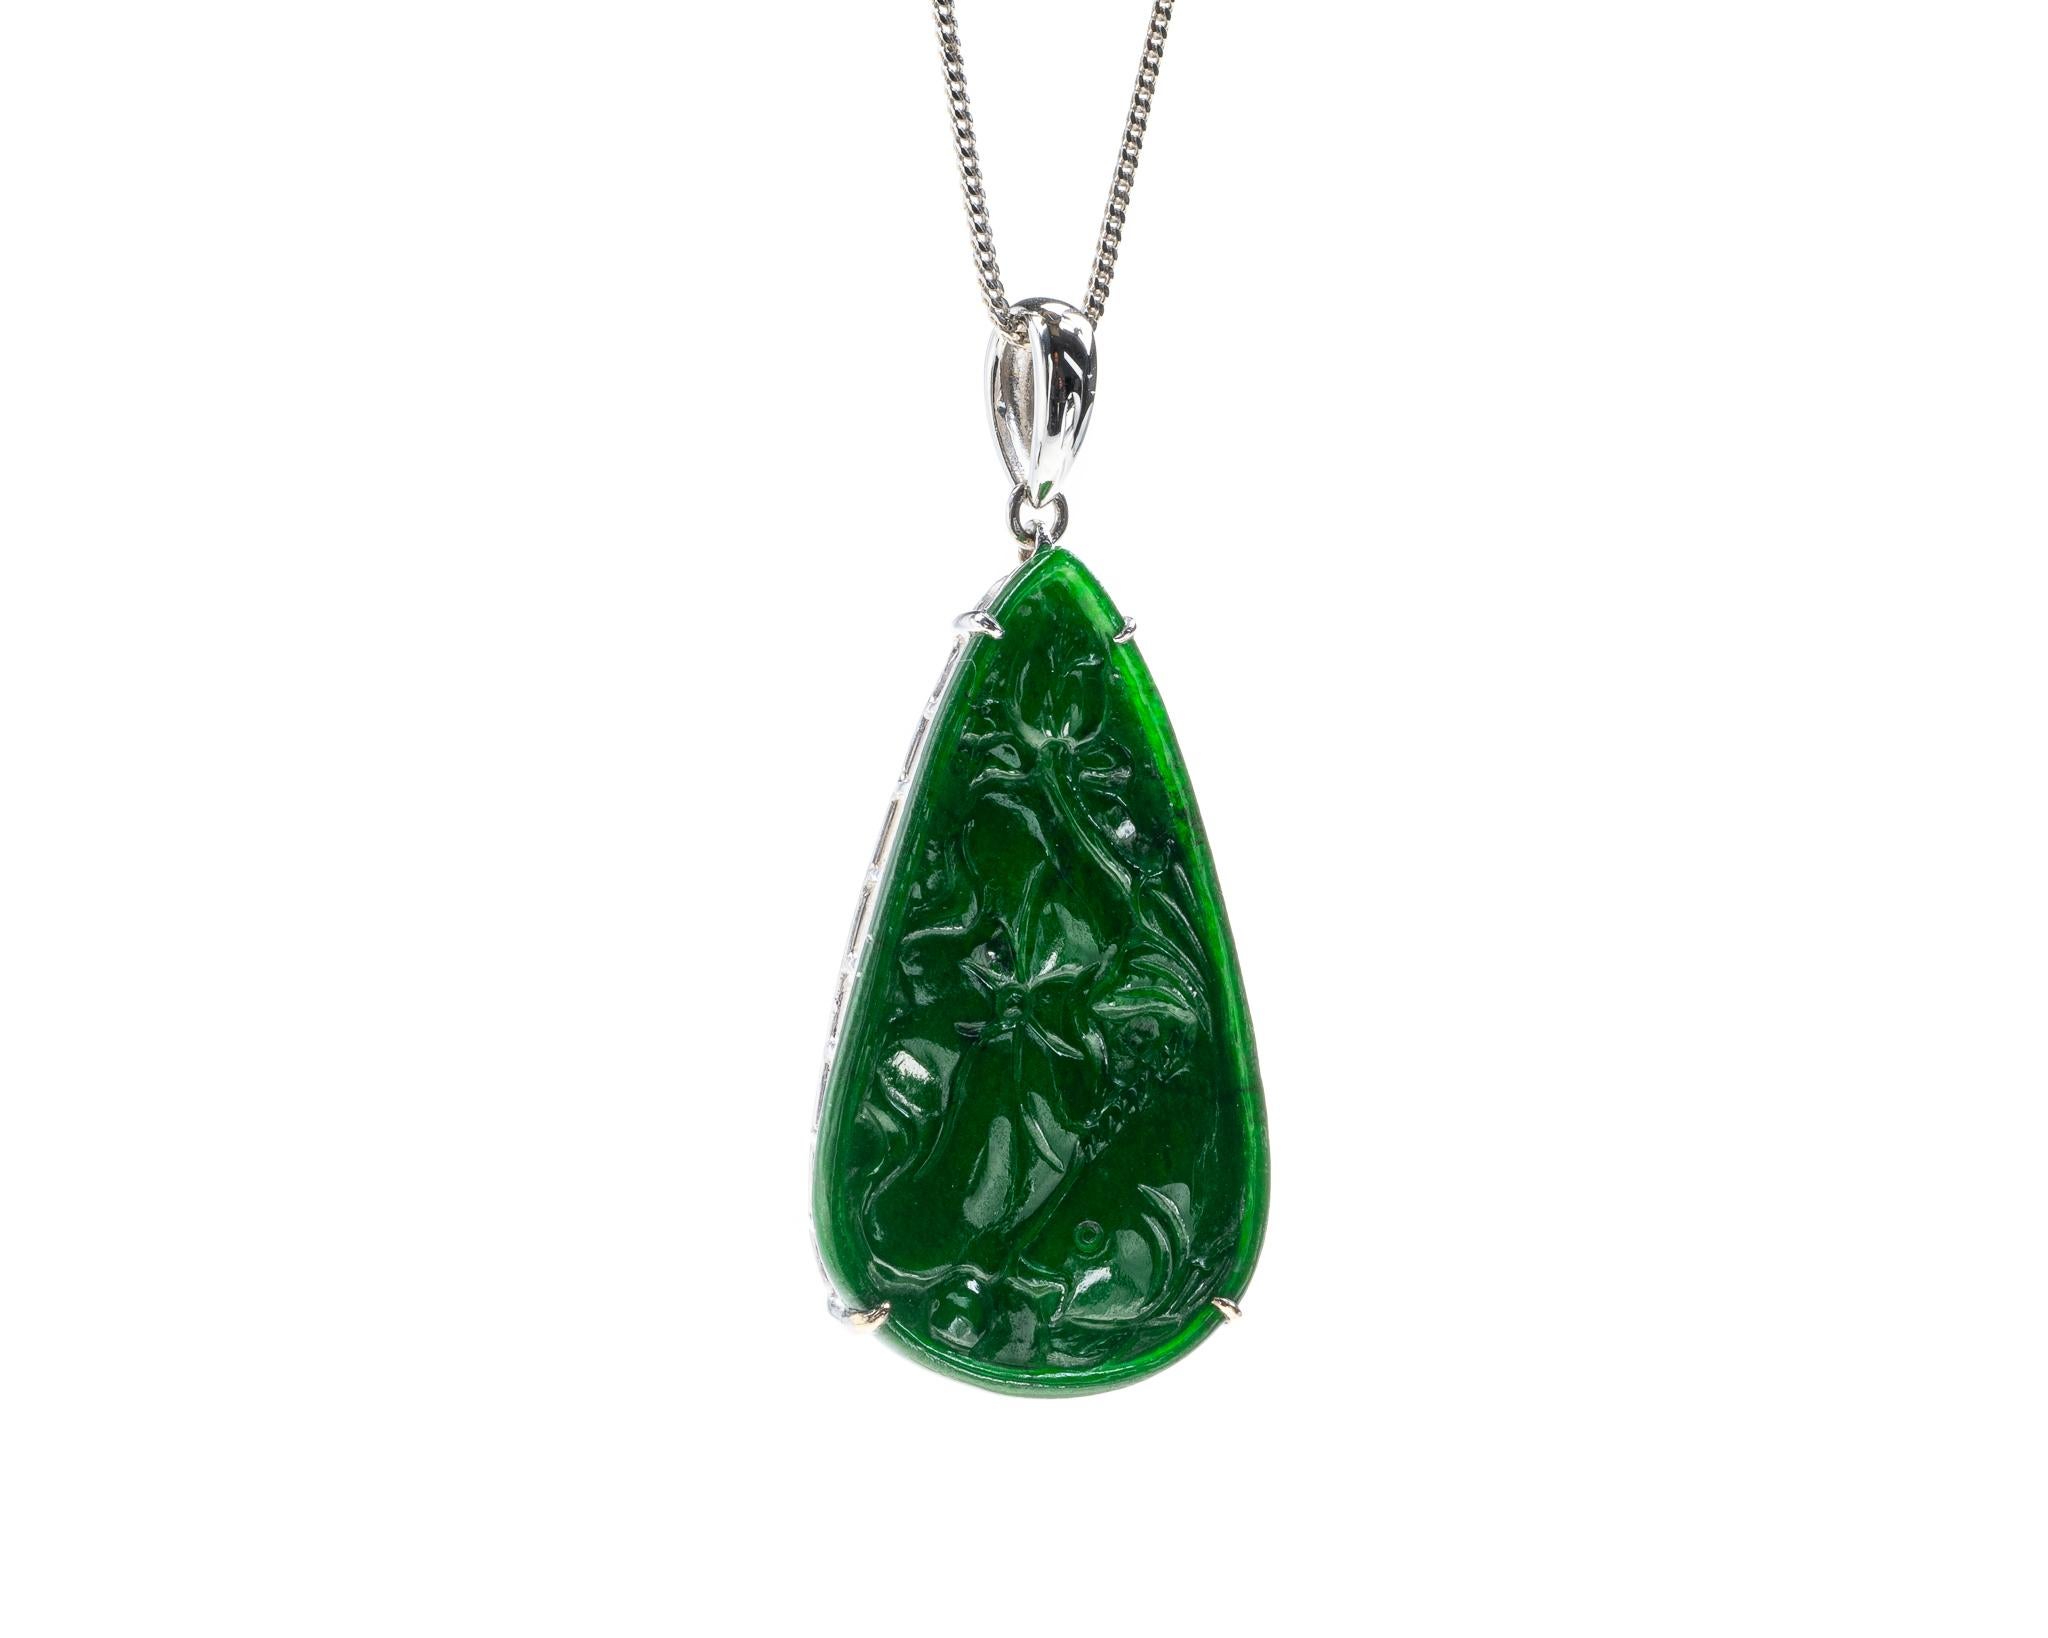 This is an all natural, untreated jadeite jade carved lotus leaf with goldfish pendant set on an 18K white gold bail.  The carved lotus leaf and goldfish together symbolizes harmony, wealth and prosperity.

It measures 1.51 inches (38.4 mm) x 0.88